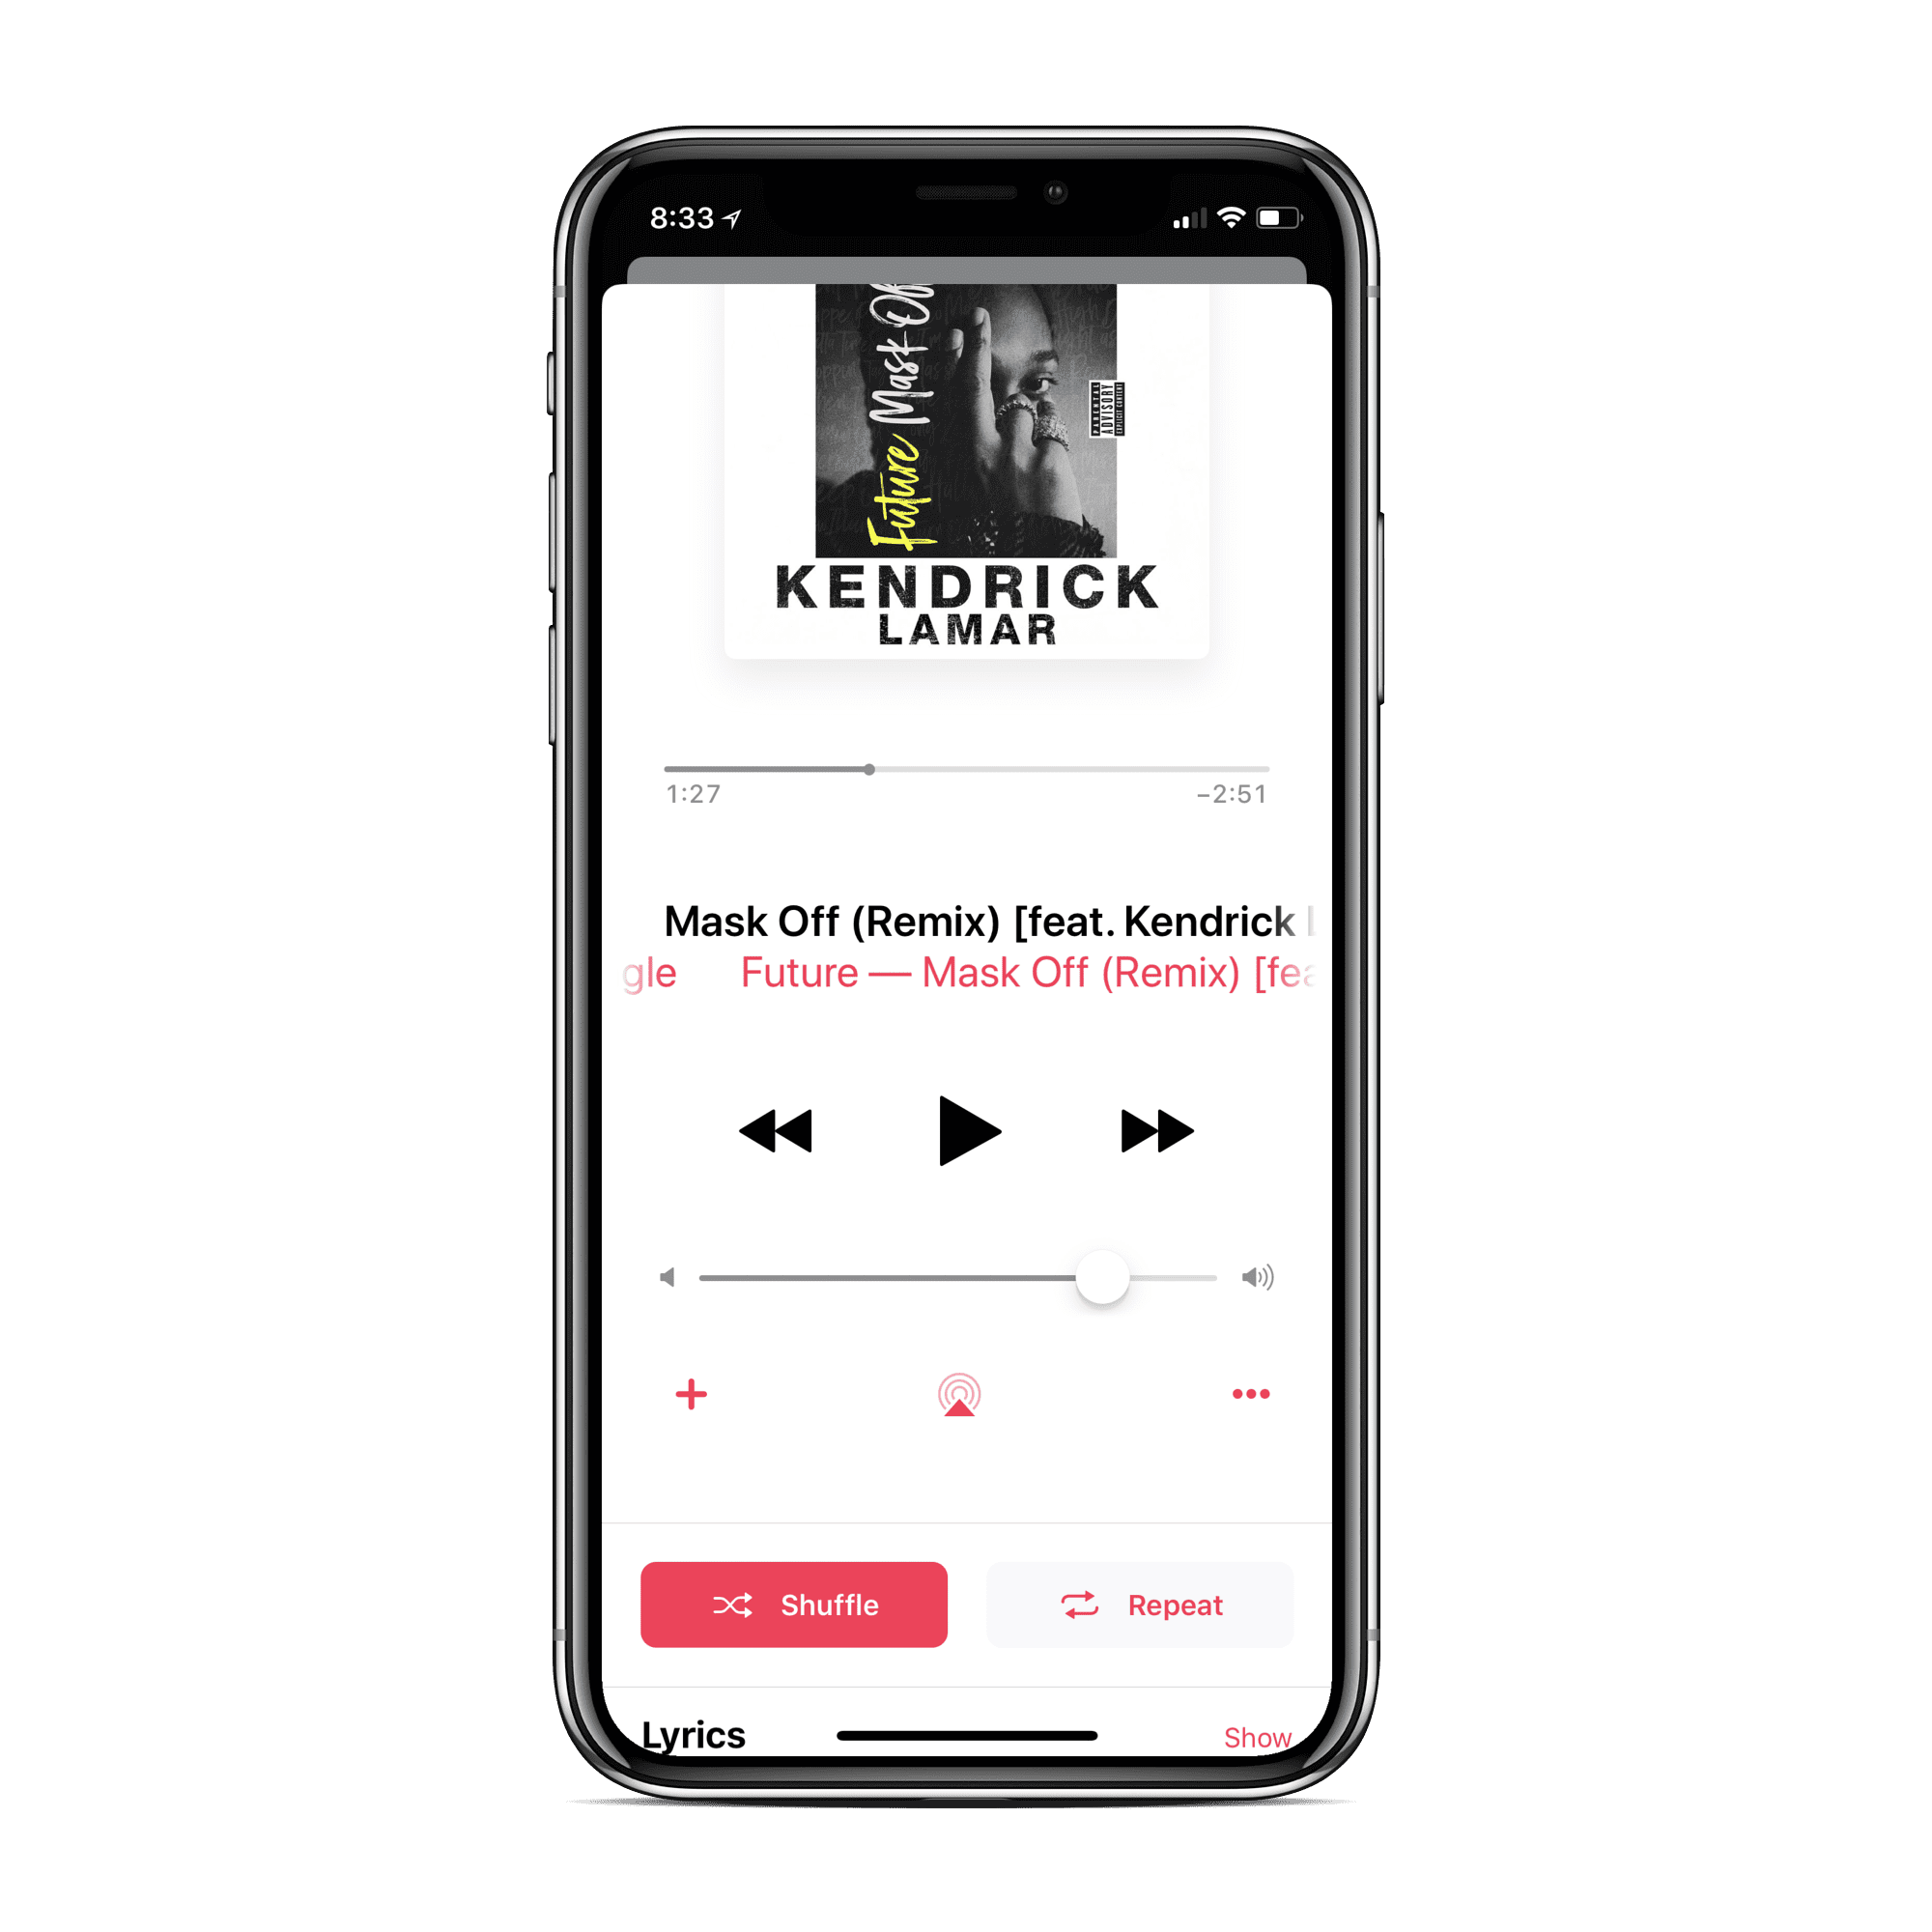 How to Shuffle and Repeat Songs on the iPhone with Apple Music - AppleToolBox